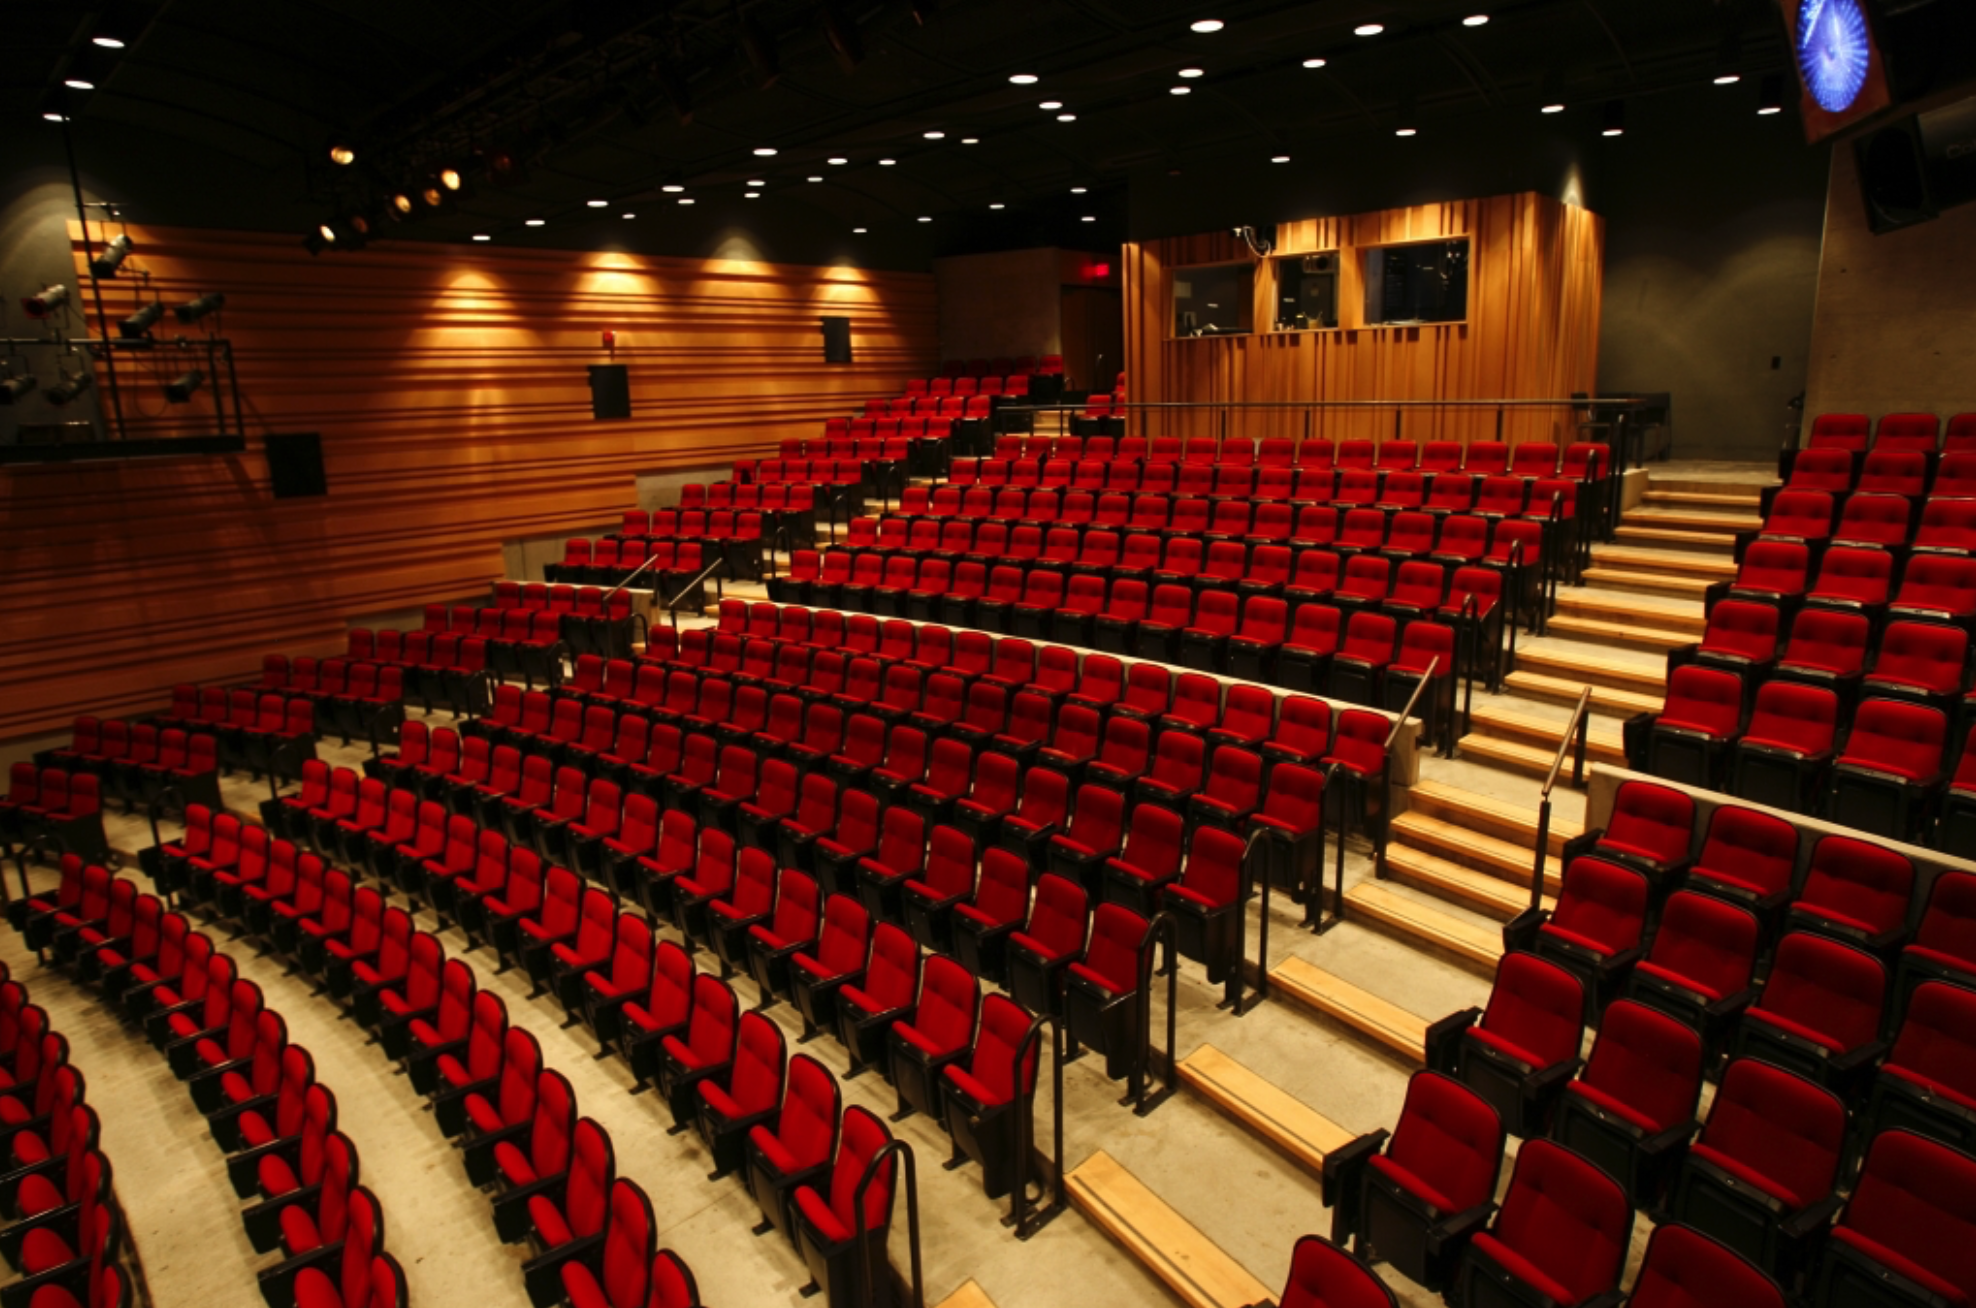 performance hall large seating area with red chairs and multiple levels